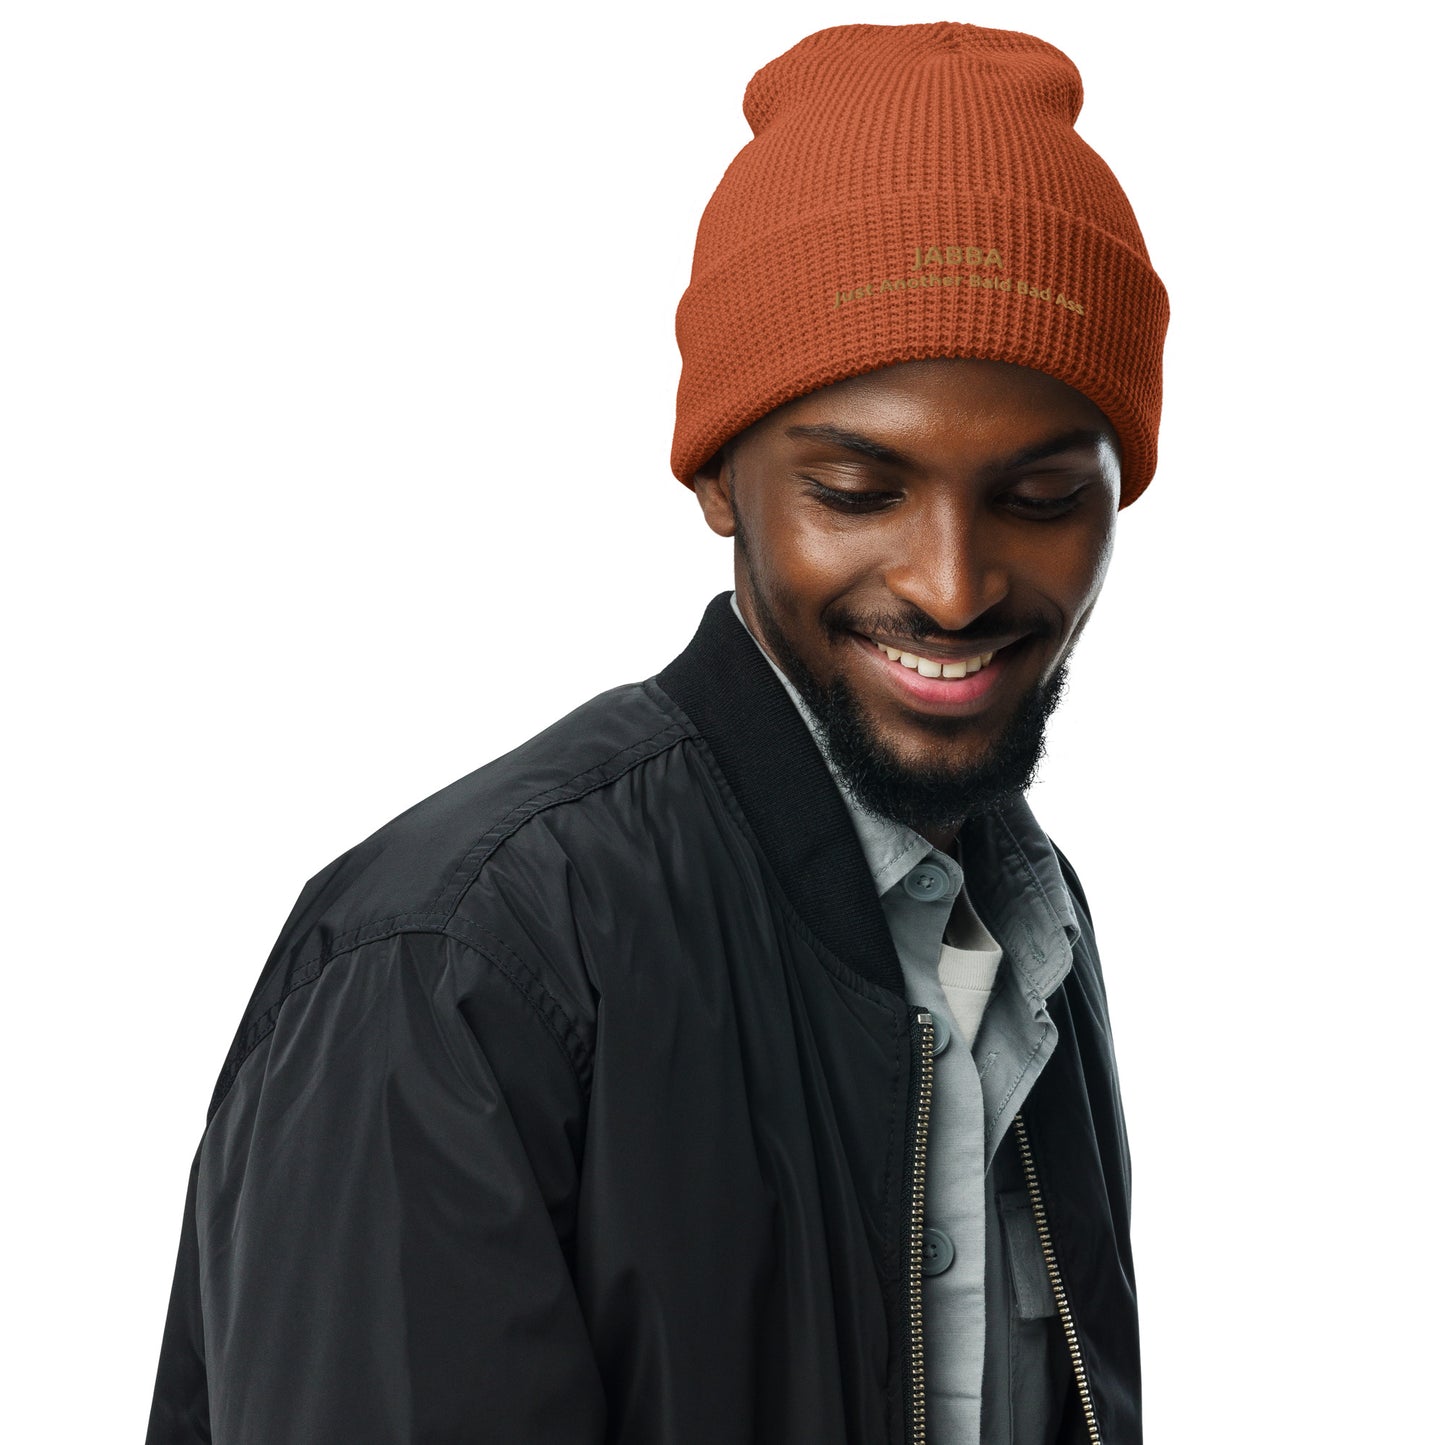 Our JABBA waffle beanie - the perfect solution for keeping your bald head warm this winter!"